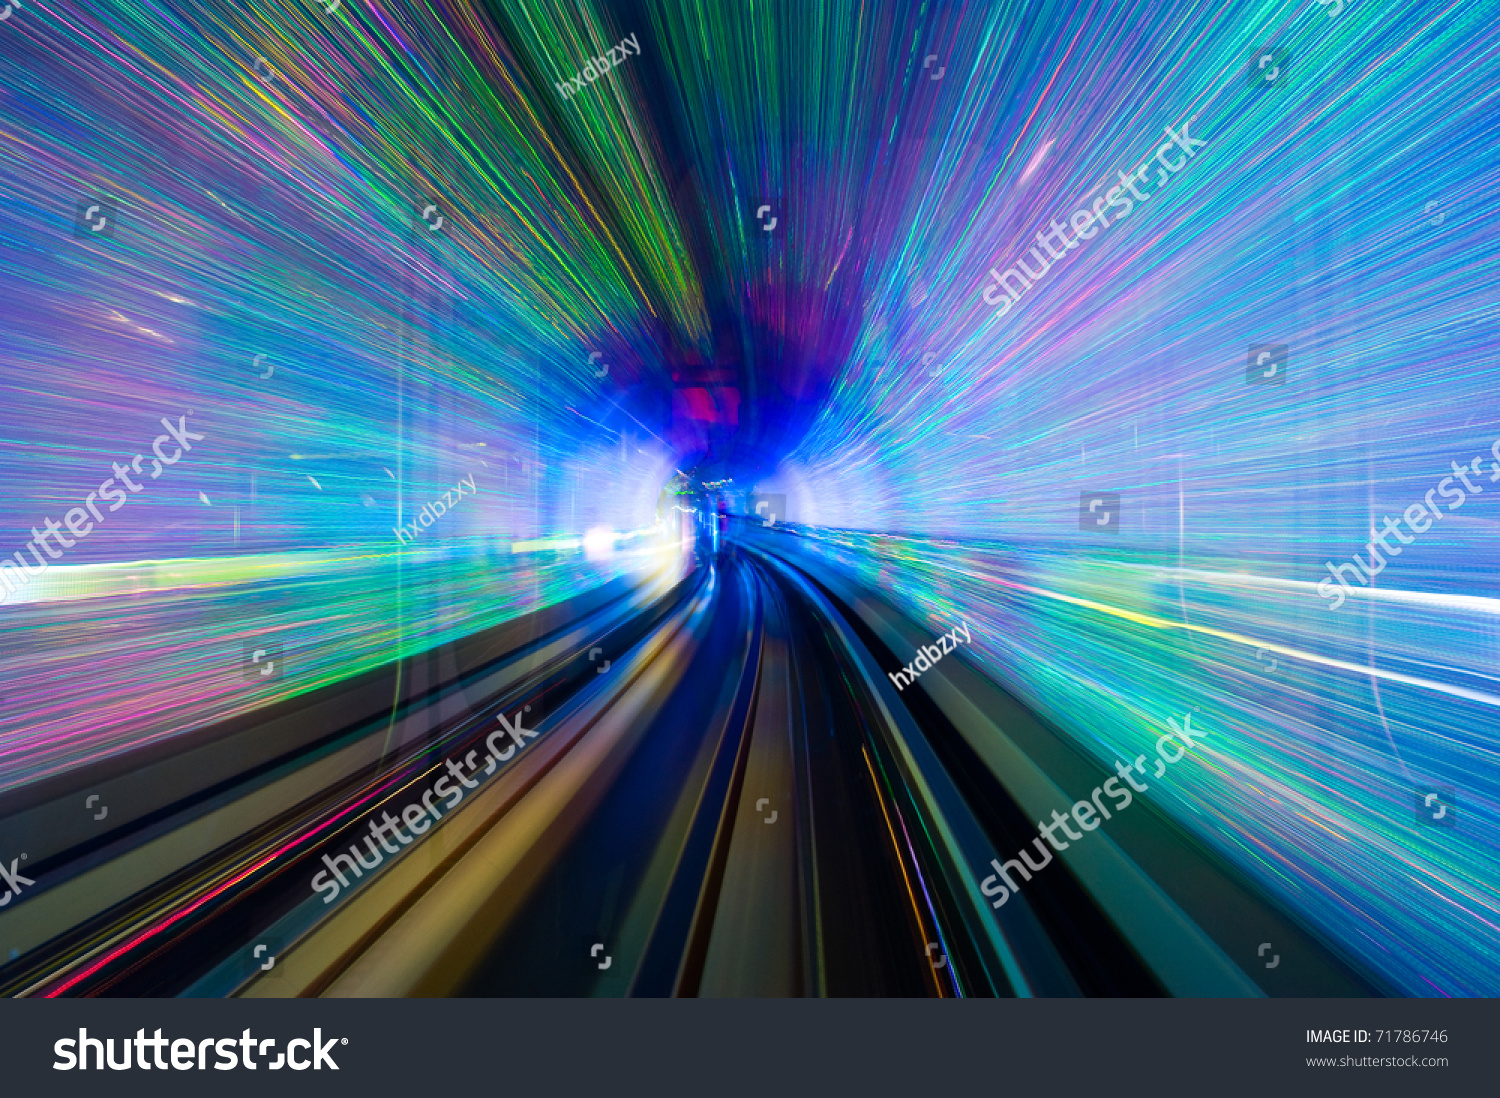 Abstract Train Moving In Tunnel. Stock Photo 71786746 : Shutterstock